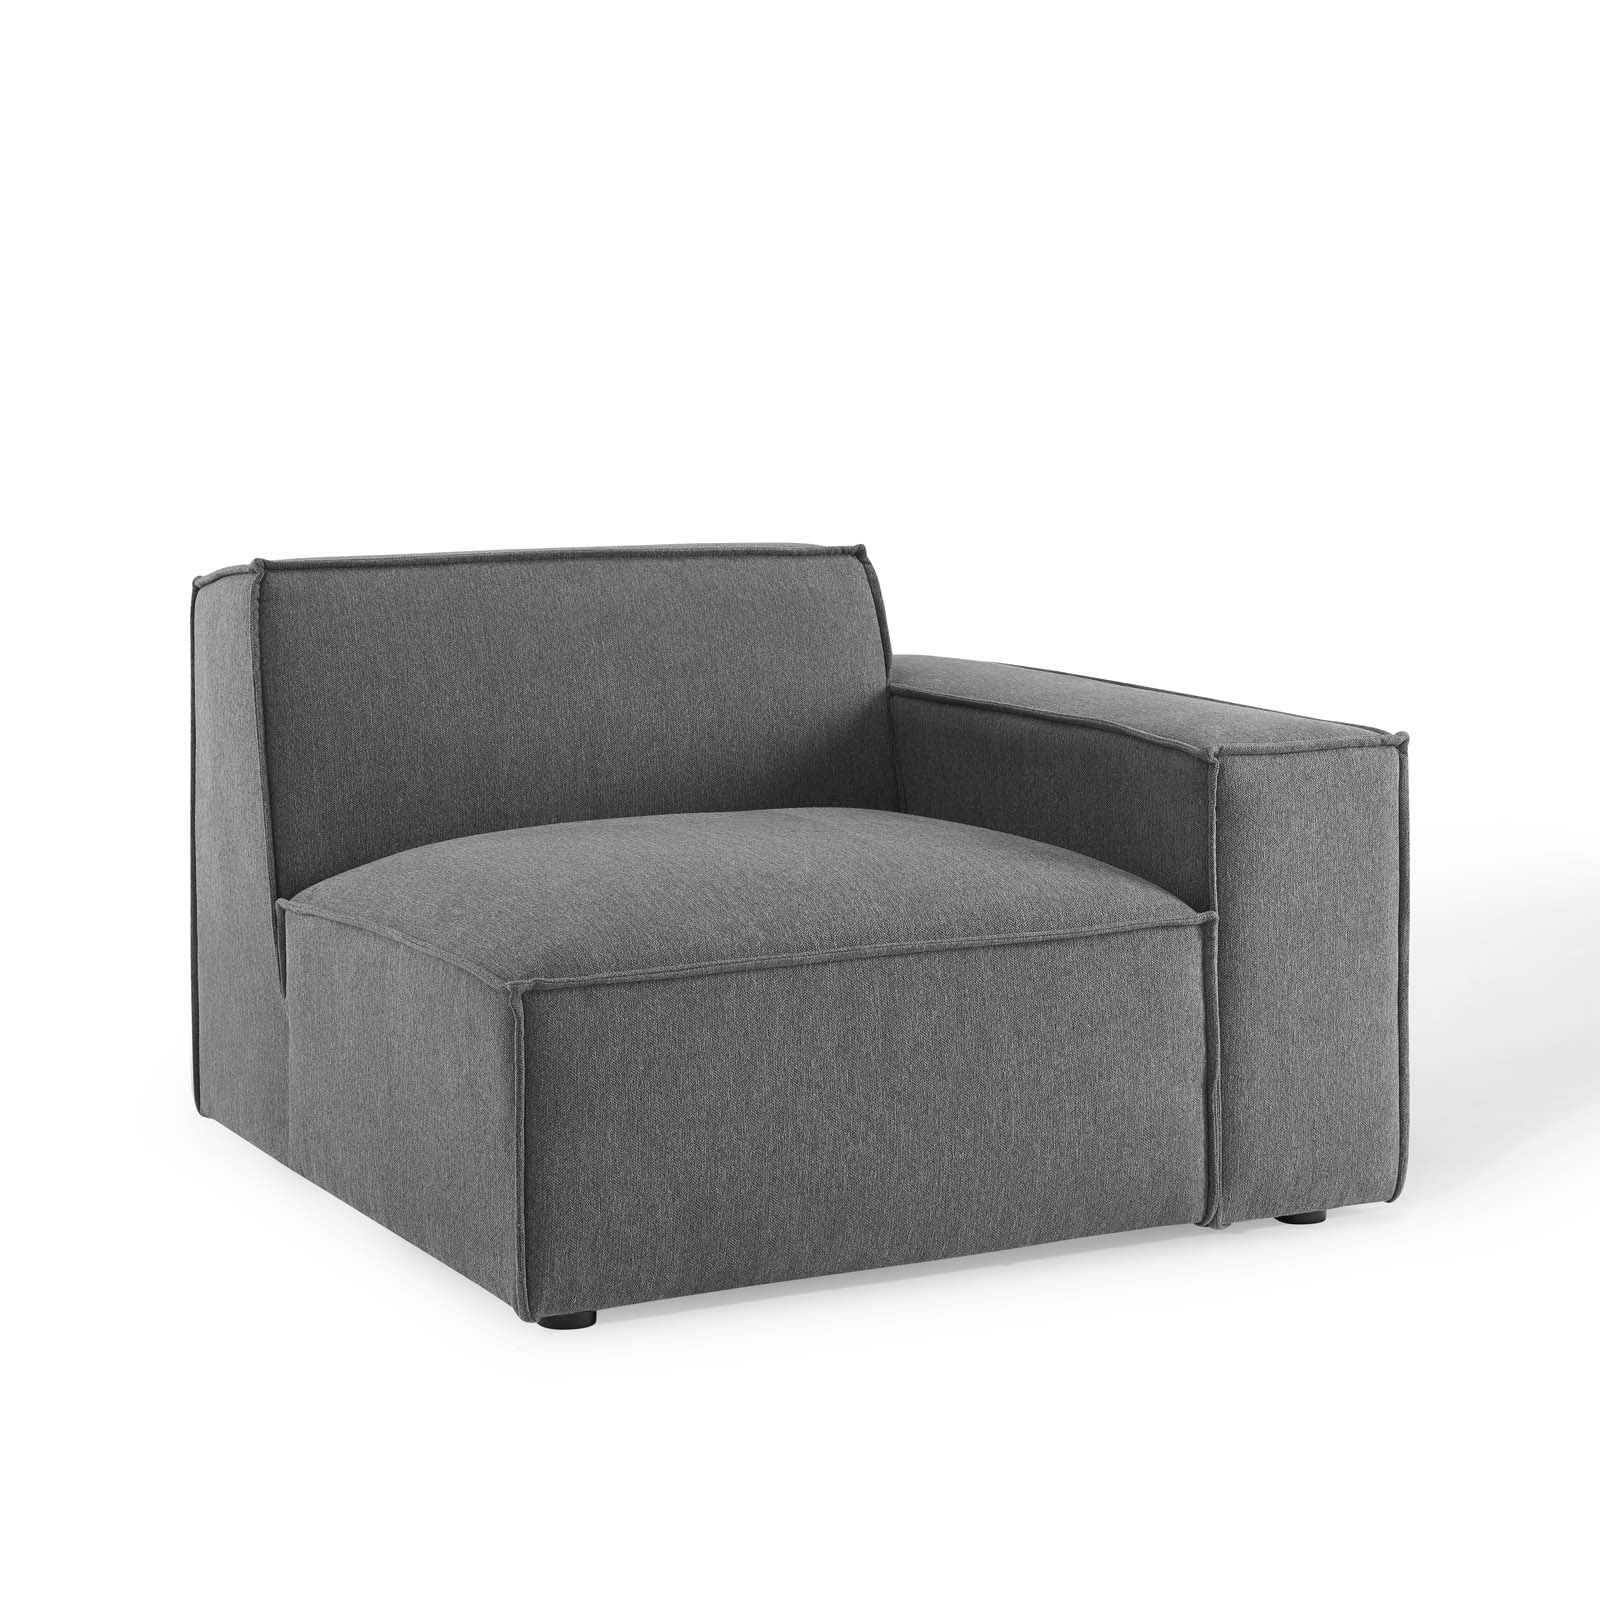 Modway Sectional Sofas - Restore 6-Piece Sectional Sofa Charcoal